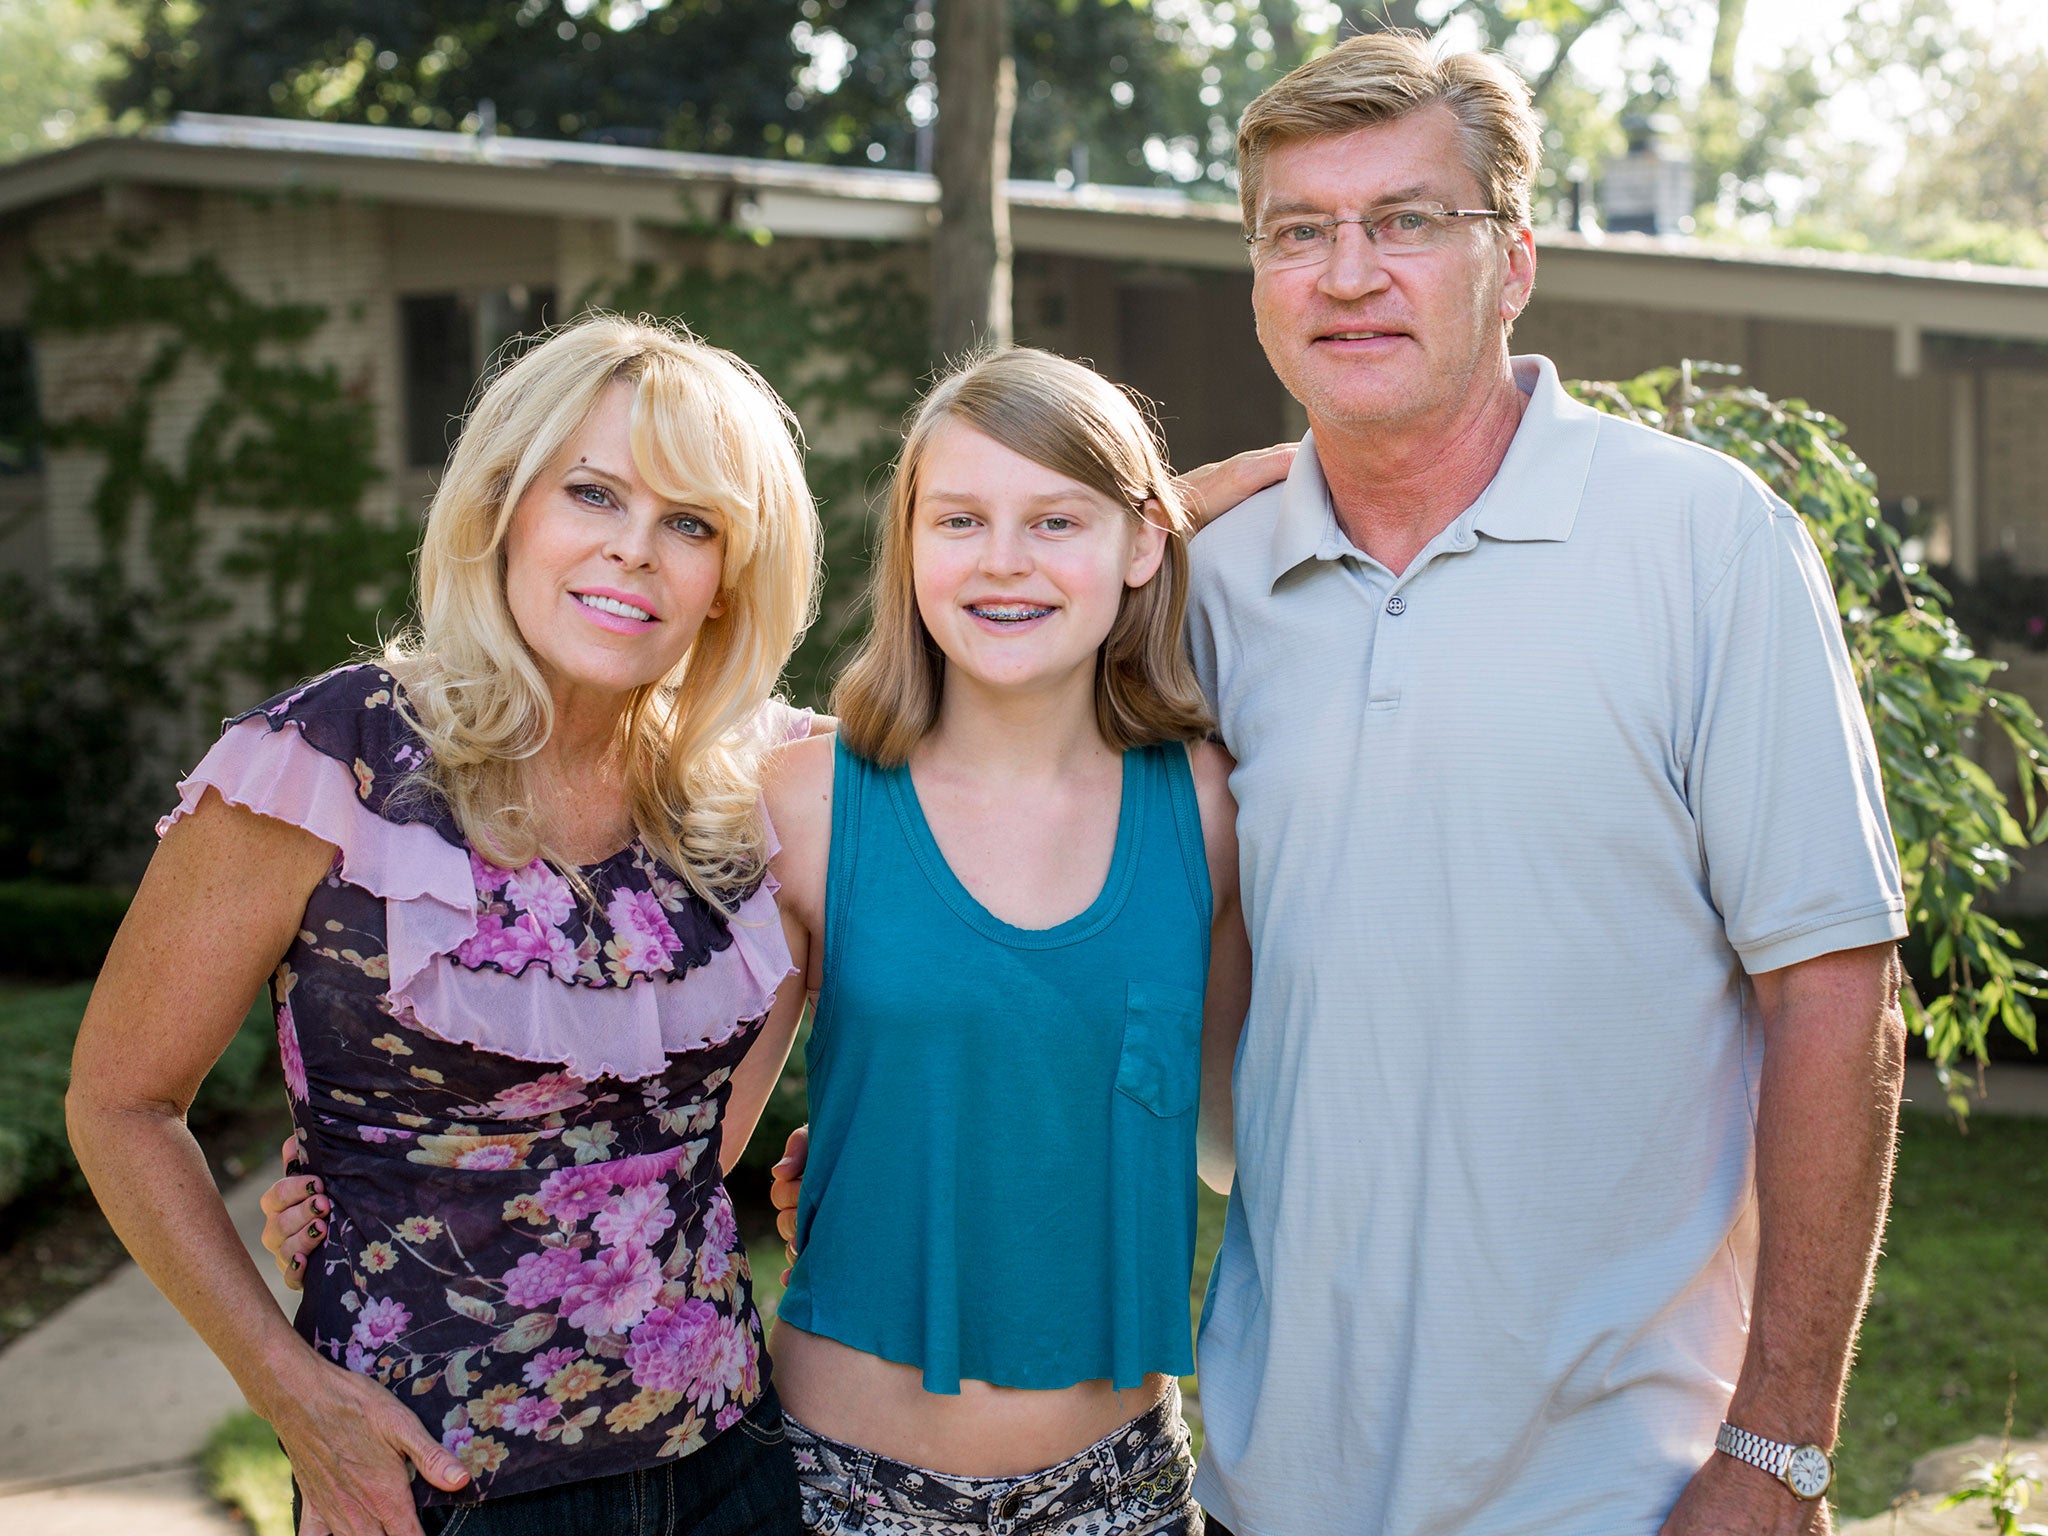 Alana Saarinen, 15, with her parents Sharon and Paul, was conceived by IVF using genetic material from three individuals